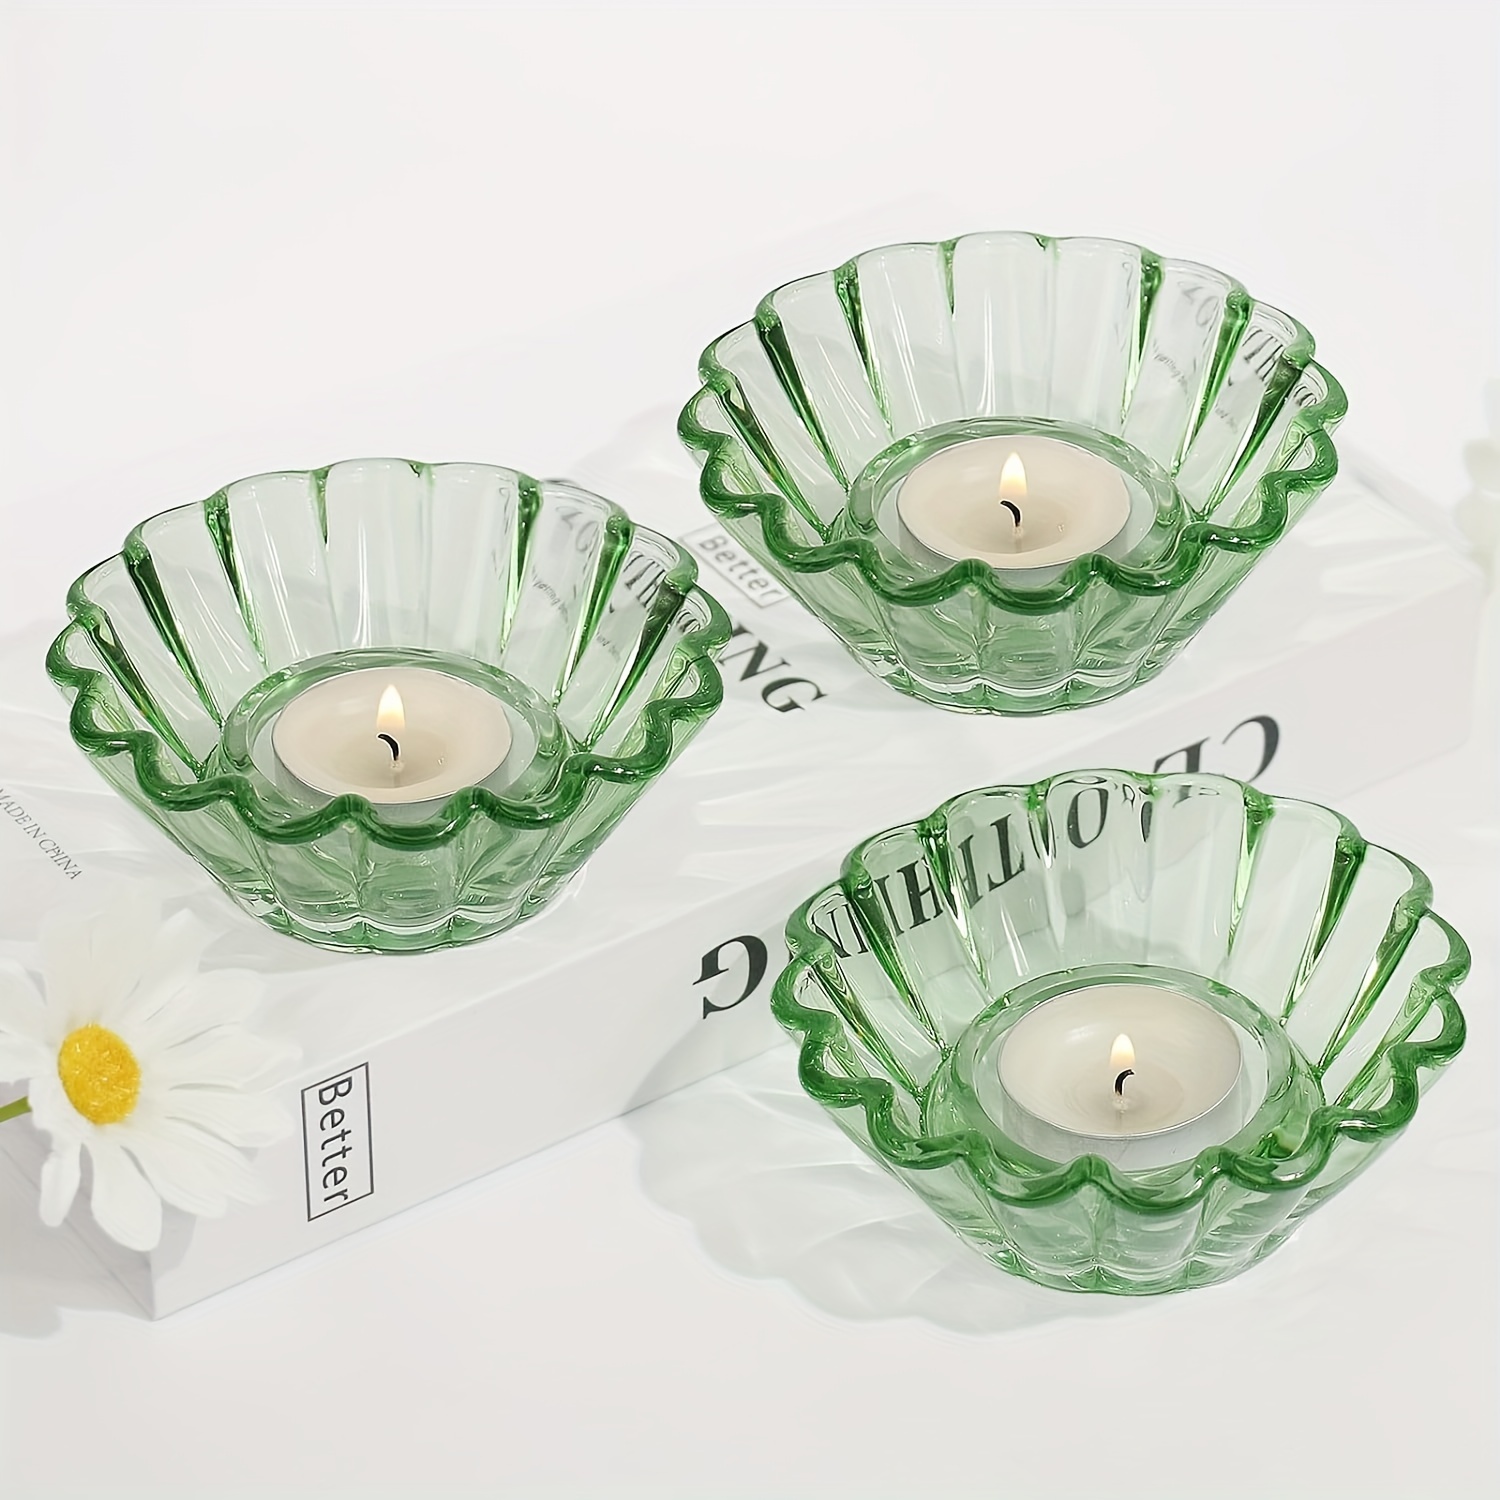 

3pcs Glass Tealight Holder, Green Votive Candle Holders New Wave Design For Wedding Centerpiece, Living Room, Home Party Decor